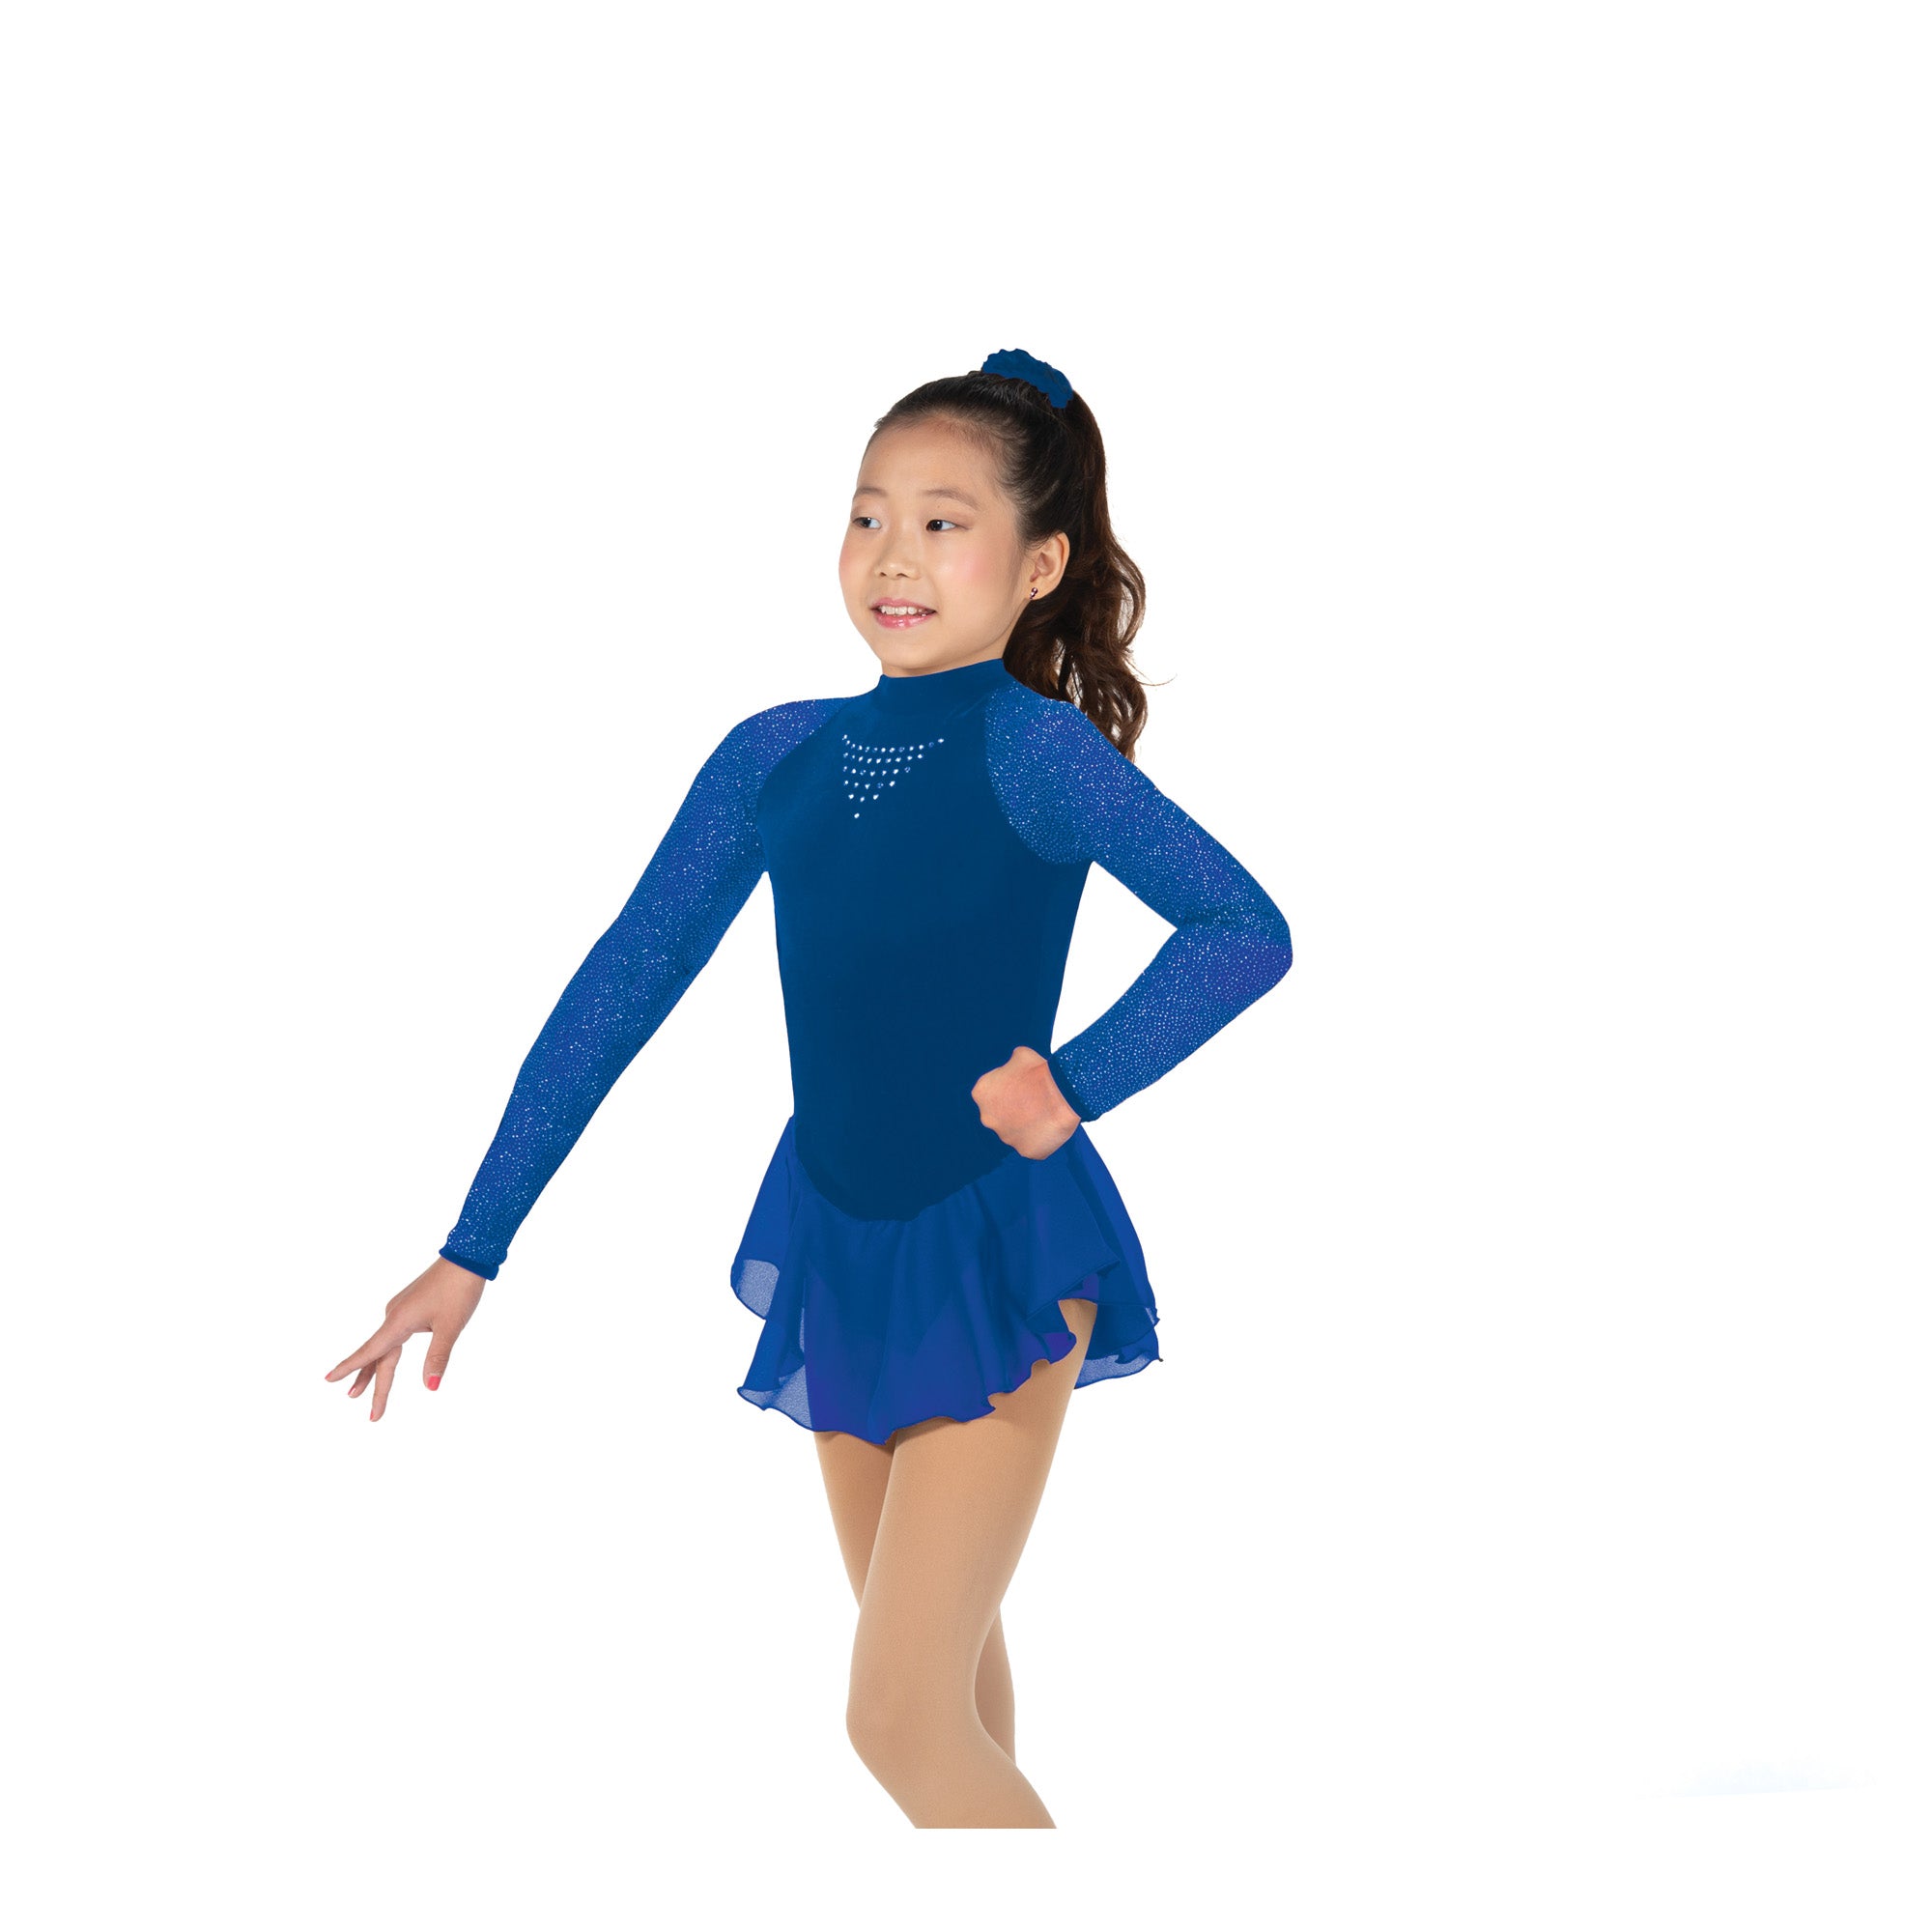 189 Starbrite Skating Dress in Blue by Jerry's